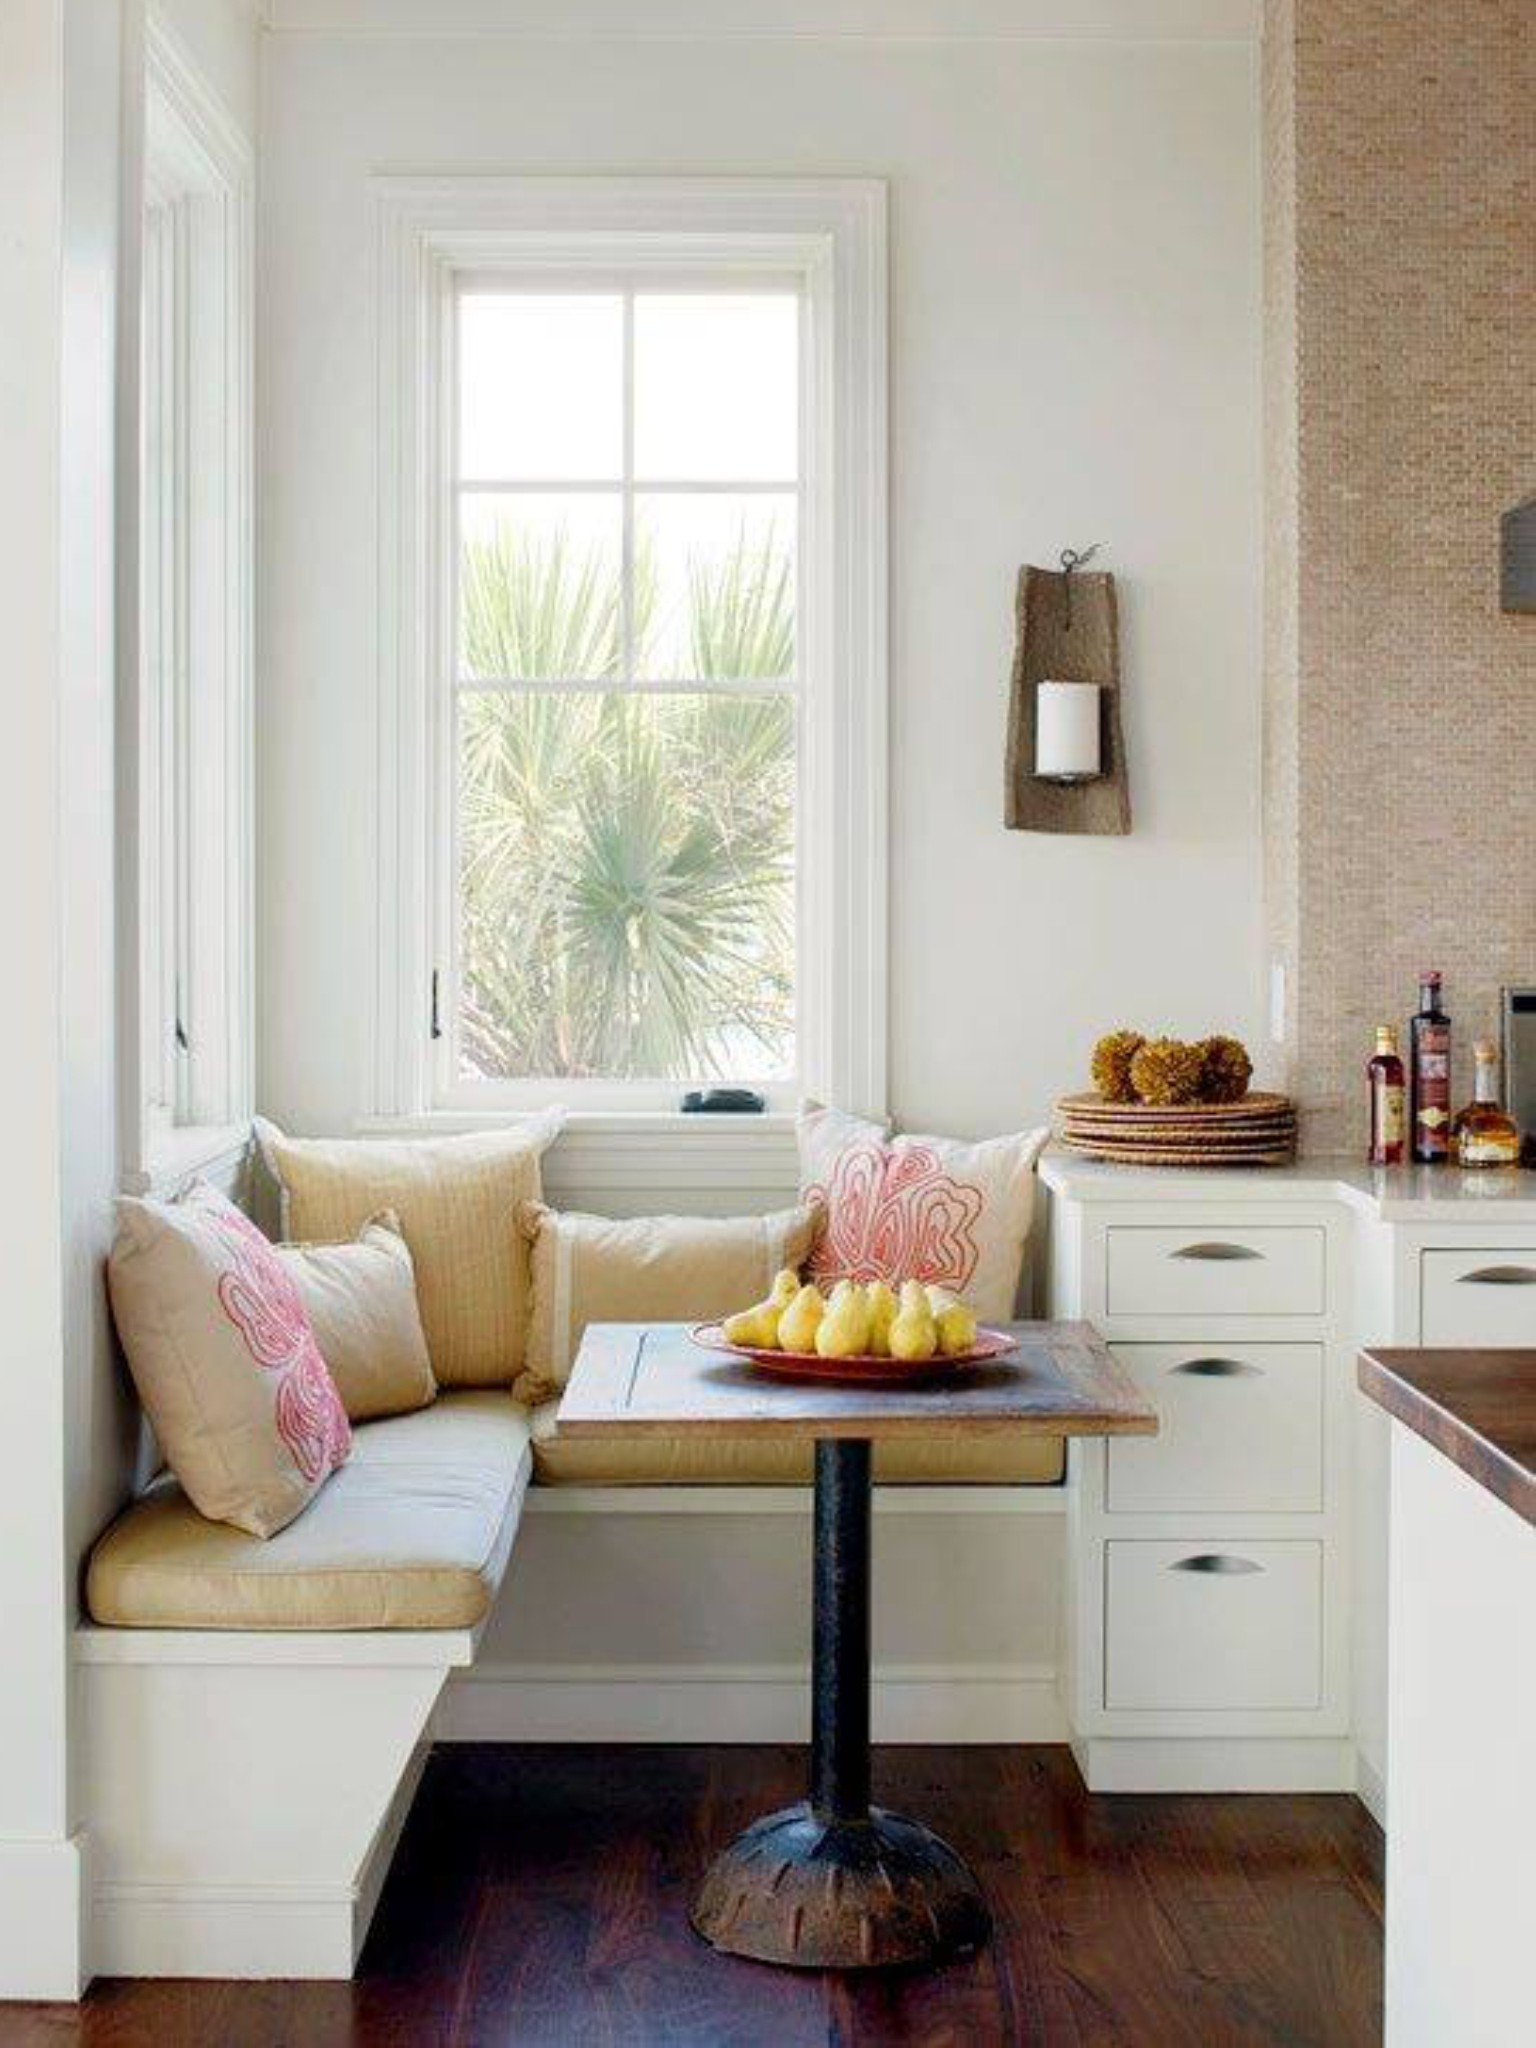 Breakfast nooks for small kitchens